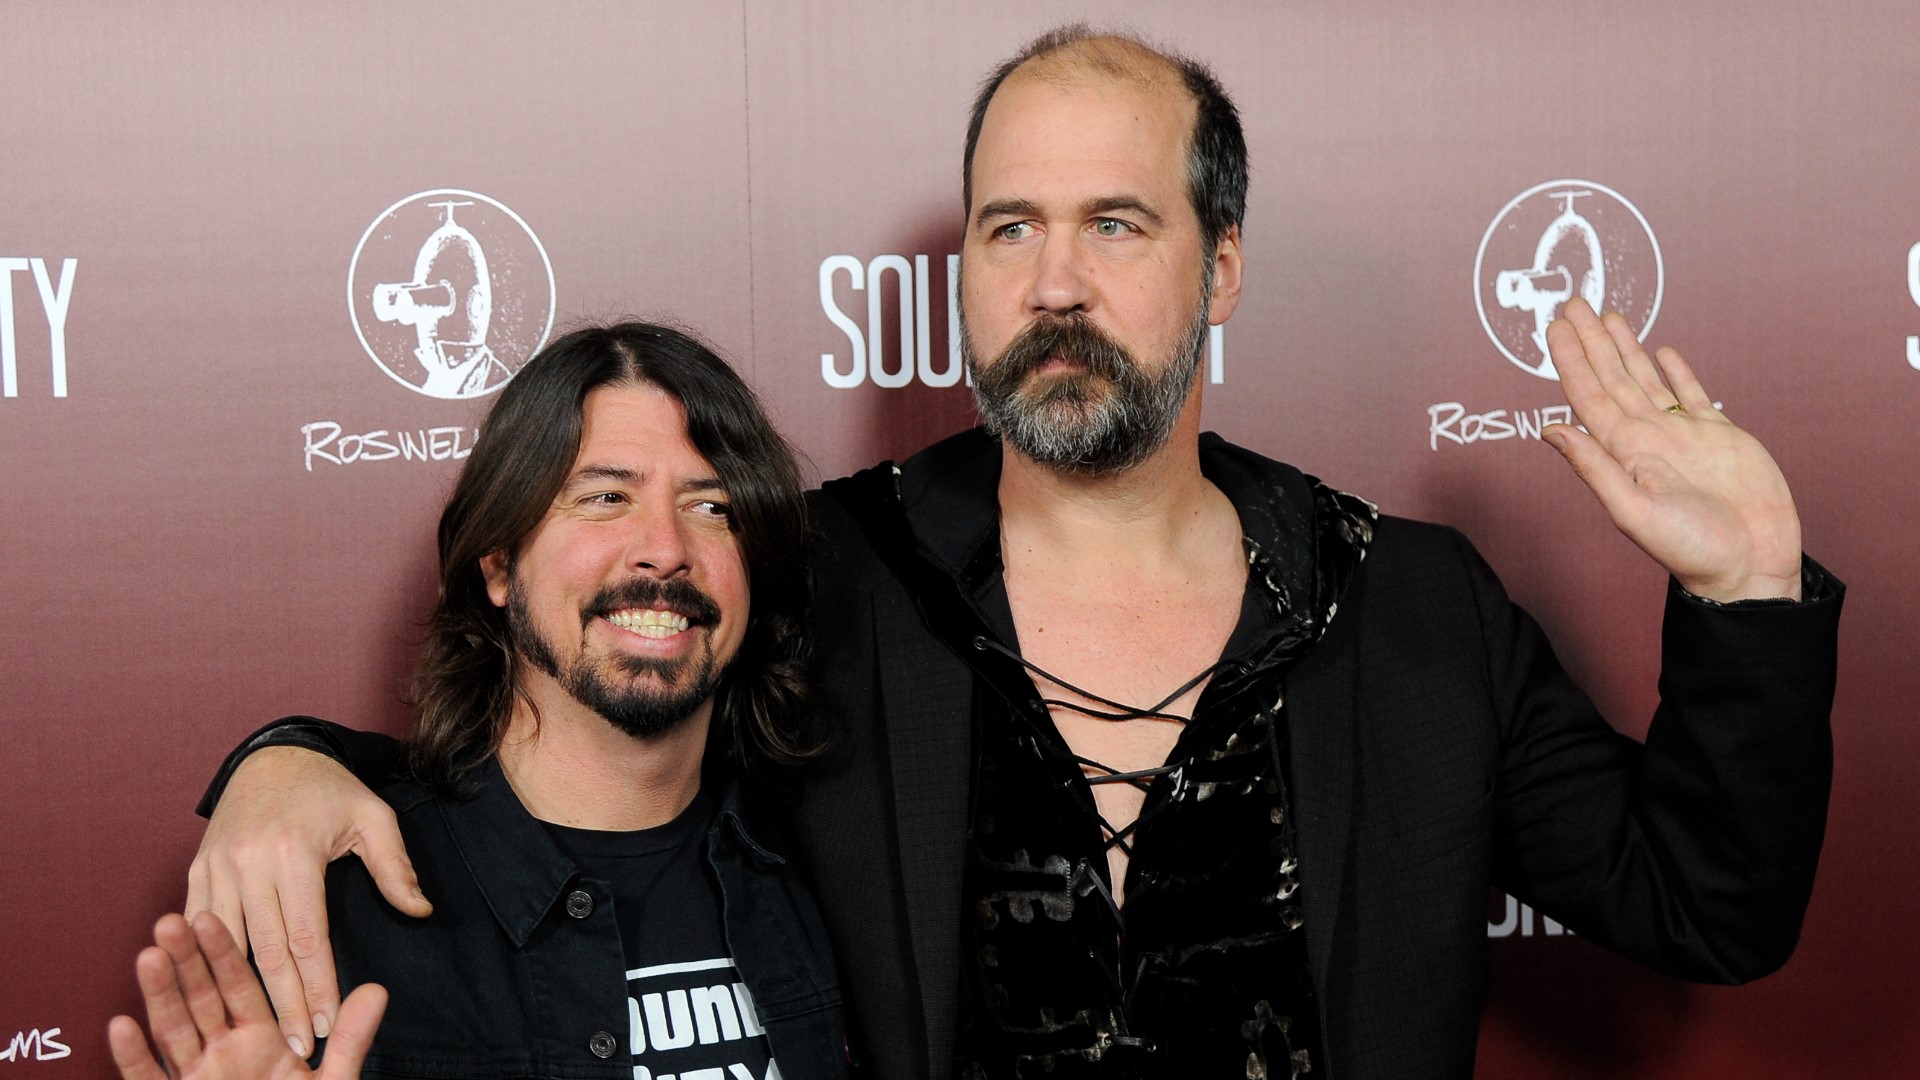 Bassist Krist Novoselic looks back fondly on his time in the 90's most influential band and says there's 'a secret' to be revealed in the coming year. #k5evening